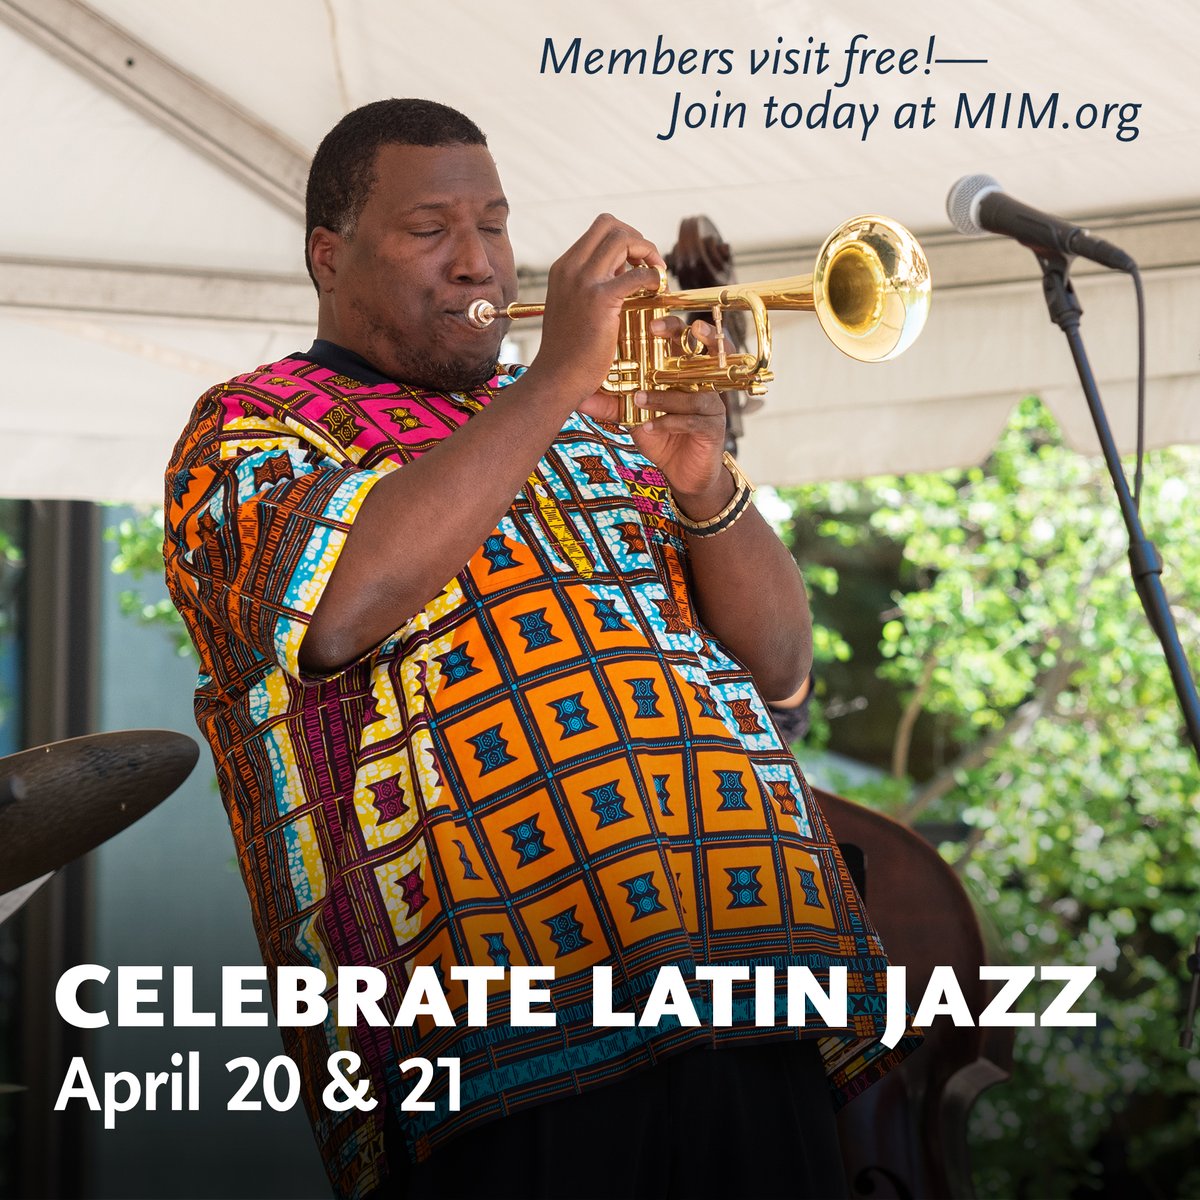 Celebrate Latin jazz at MIM on April 20 and 21! 🎺 See the full schedule of family-friendly activities here: bit.ly/3xqeOS6